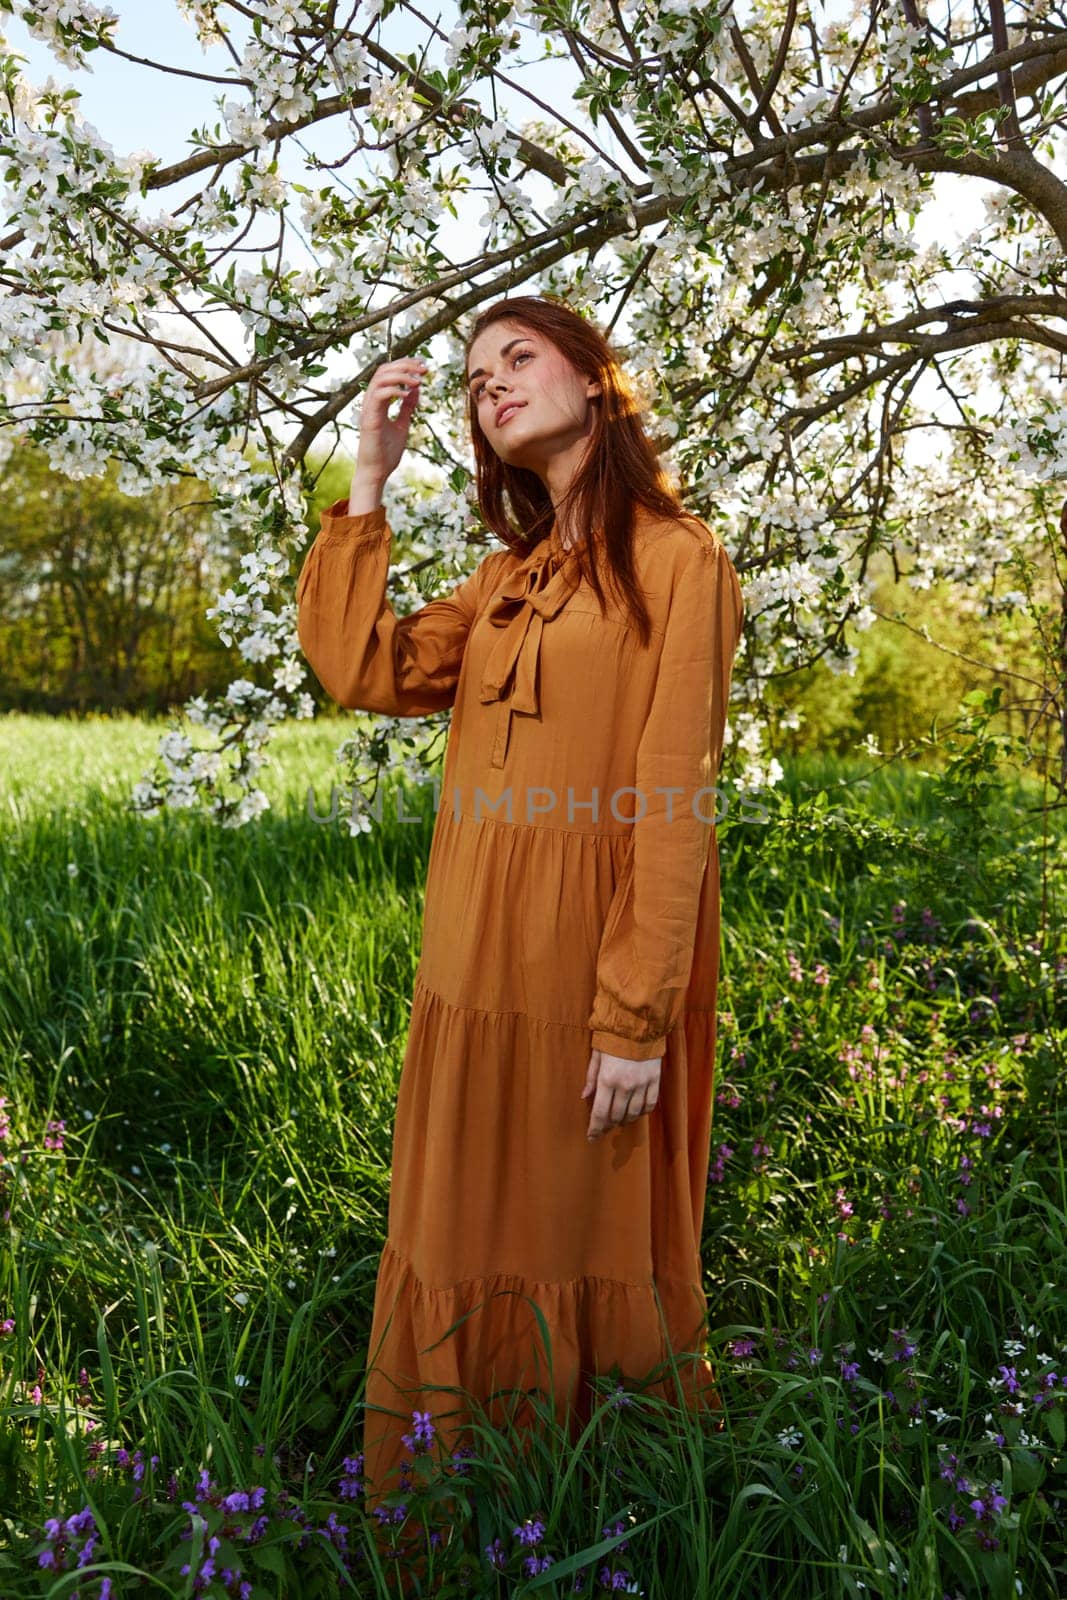 a happy, modest woman stands in an orange dress near a flowering tree and enjoys nature and a sunny summer day. High quality photo